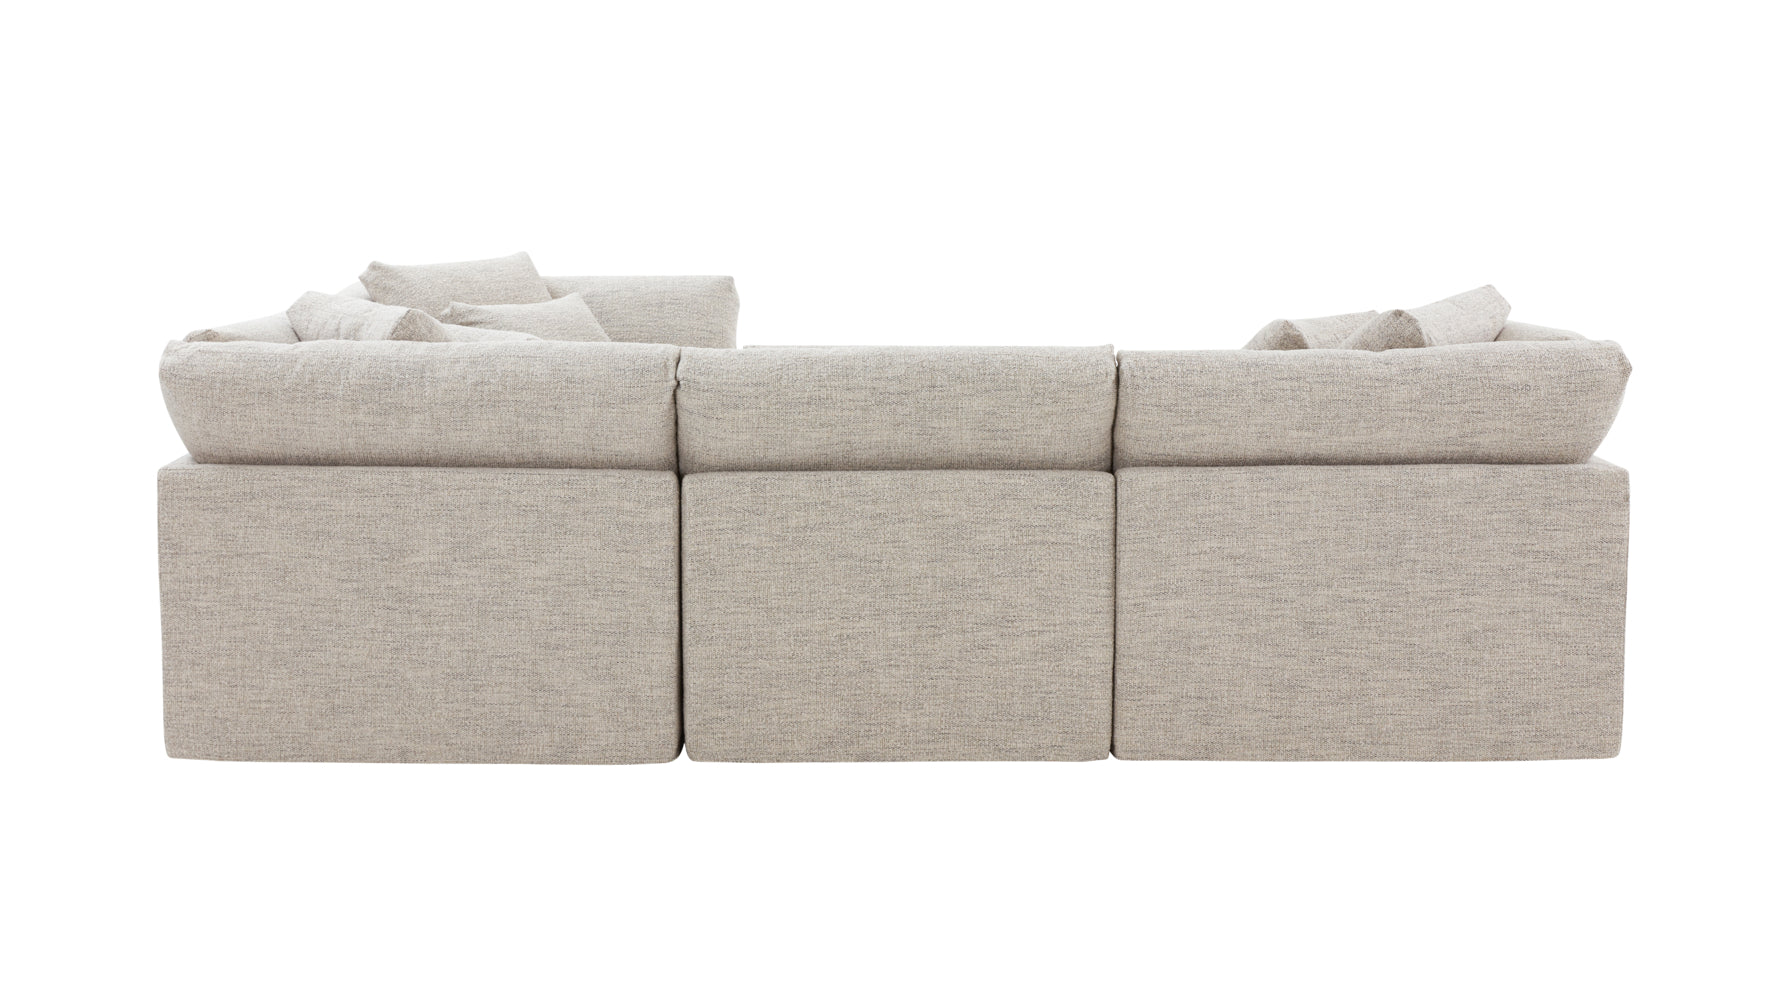 Get Together™ 4-Piece Modular Sectional Closed, Standard, Oatmeal - Image 6